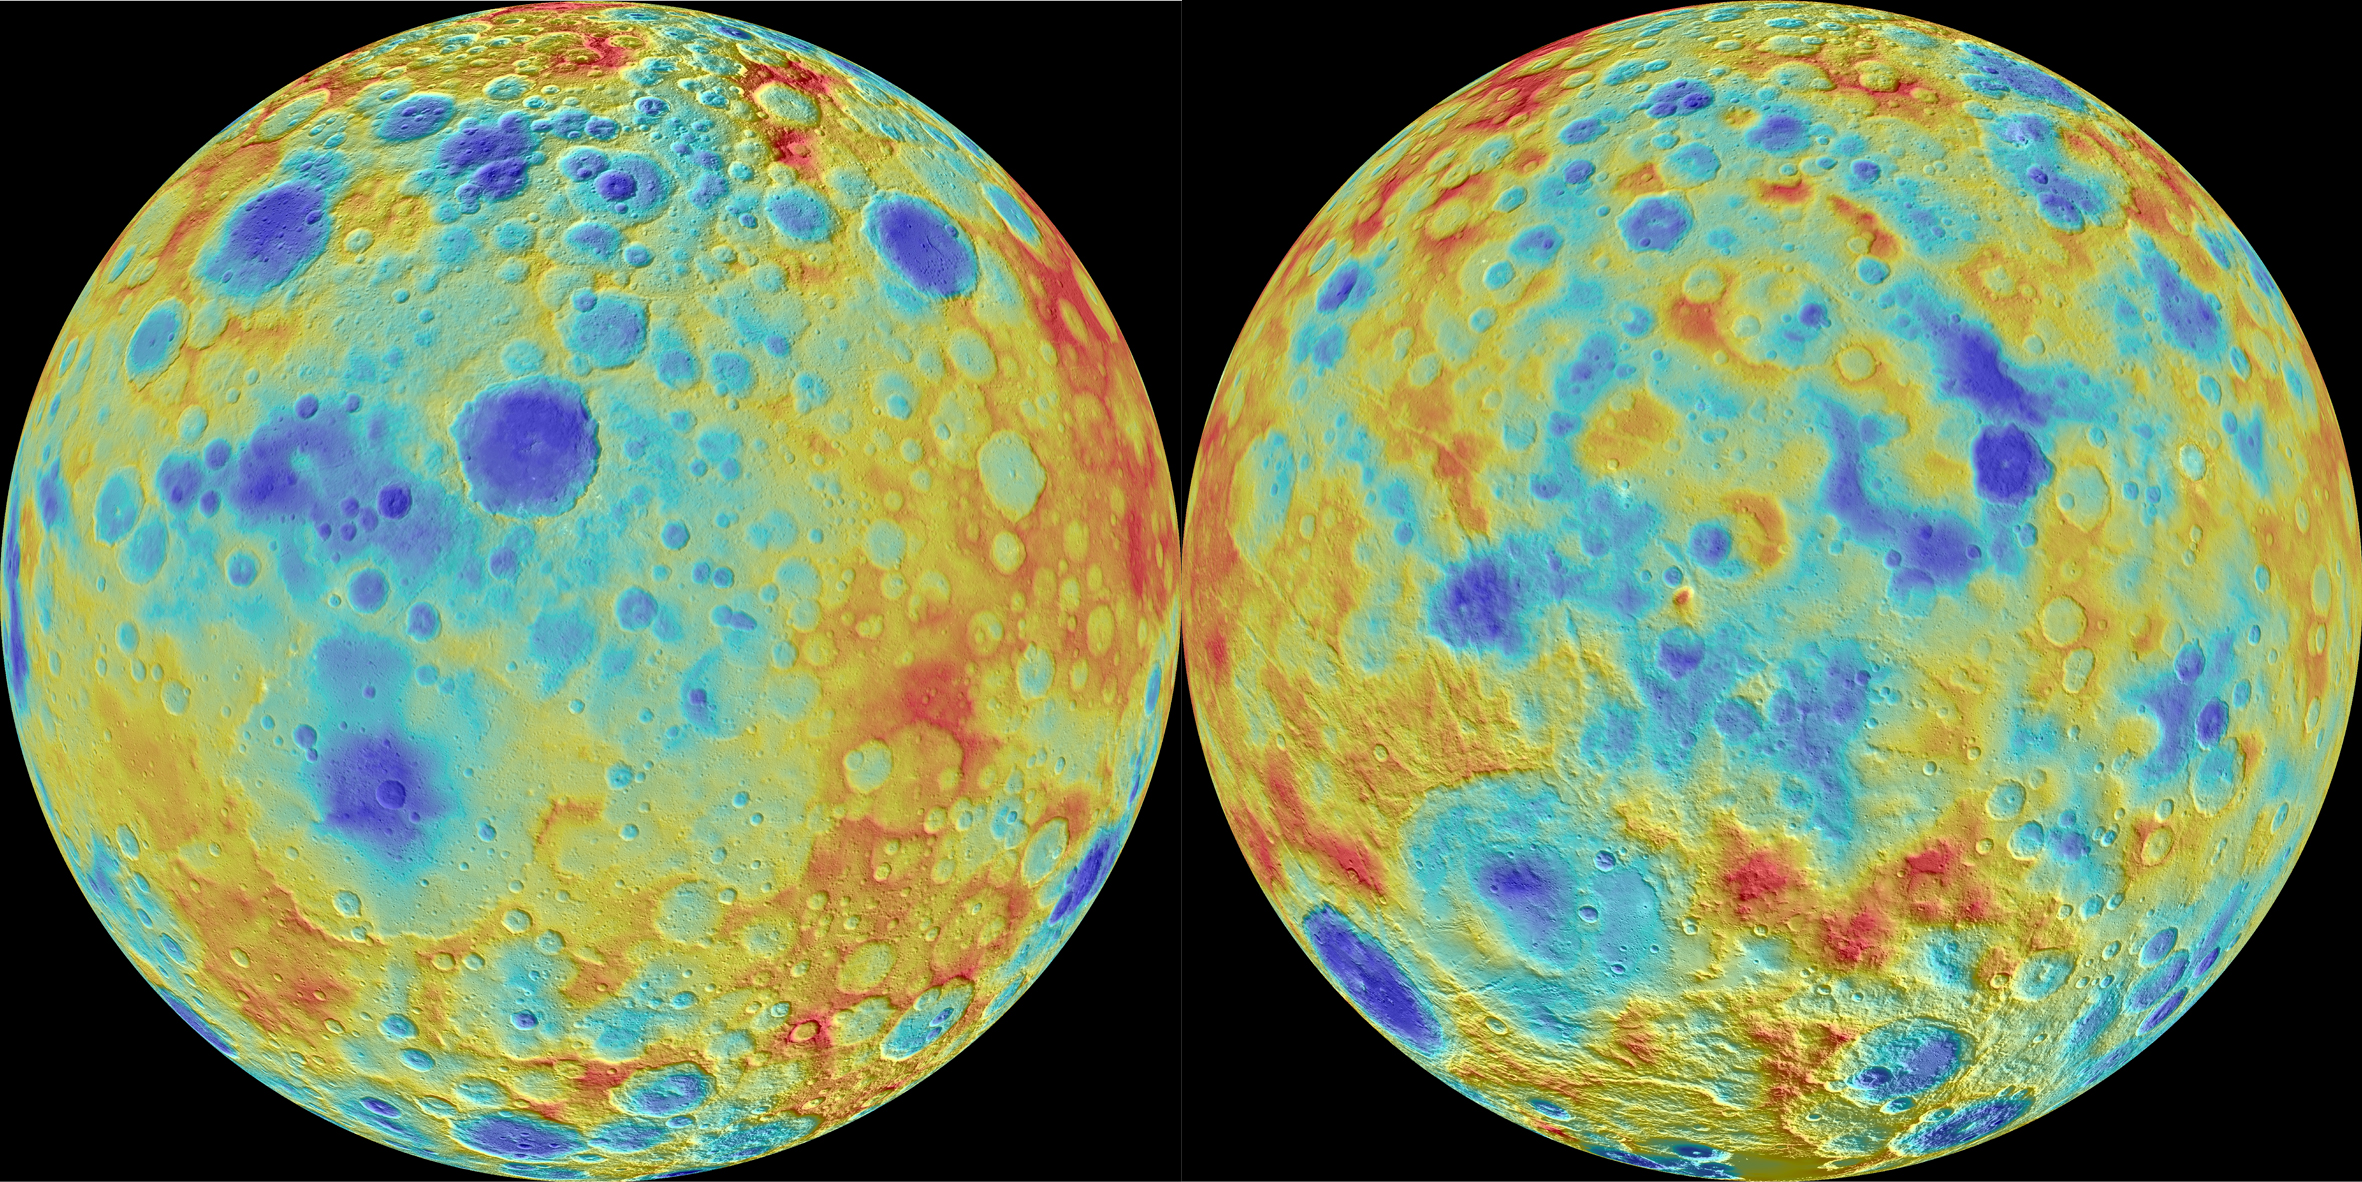 Those Bright Spots On Ceres Are Weirder Than We Imagined